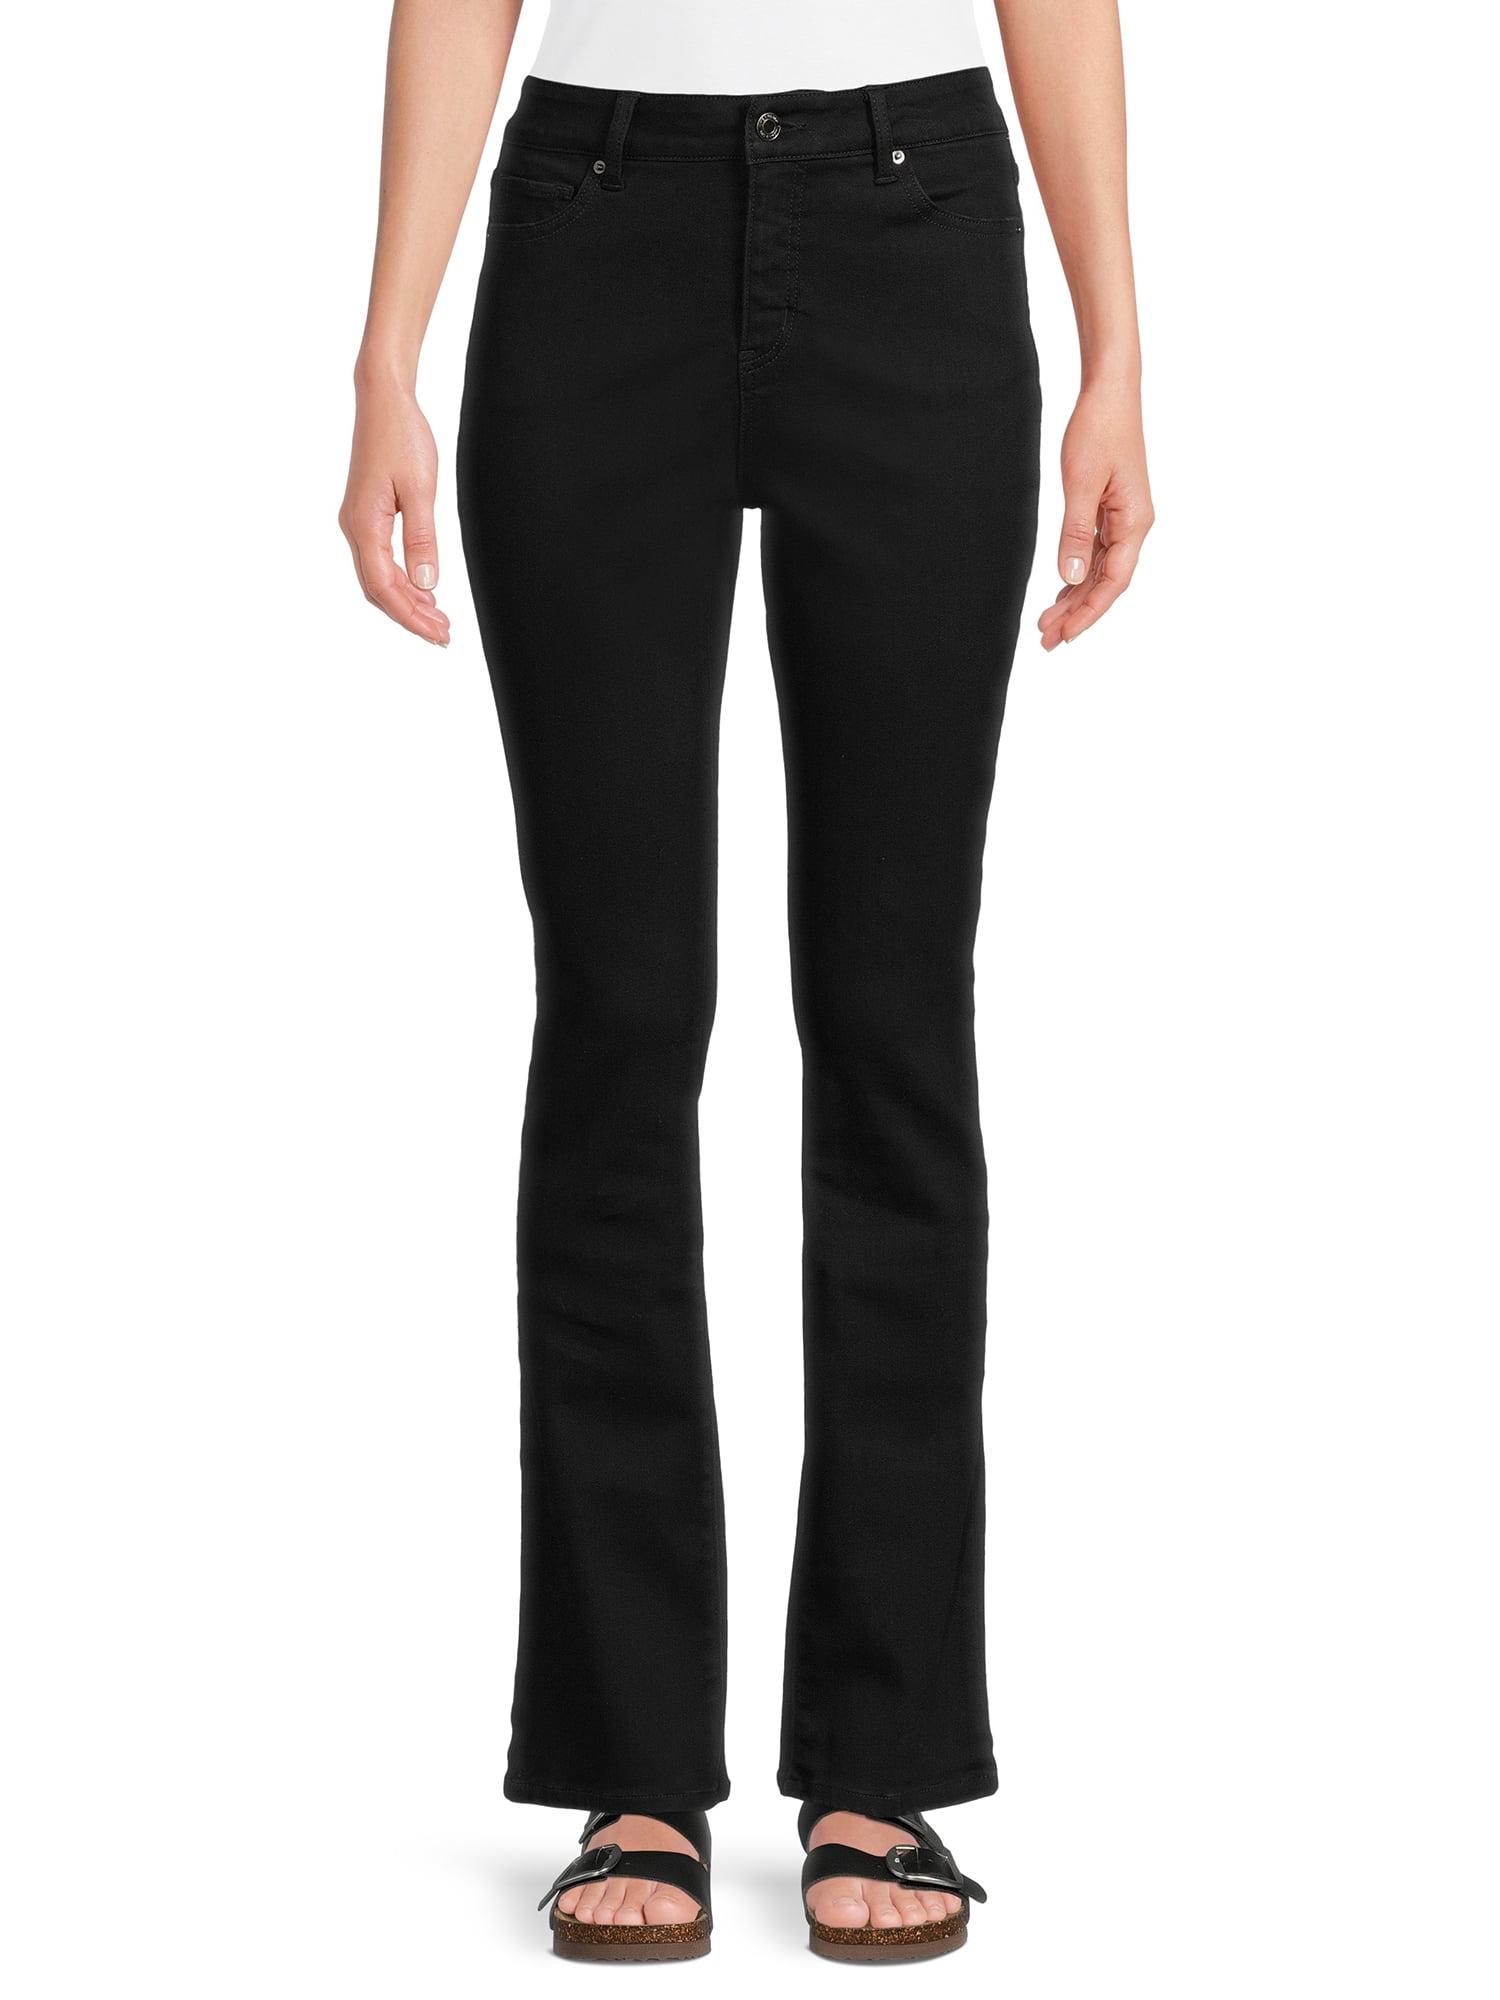 Walmart Time and Tru Women's High Rise Bootcut Jeans 17.98